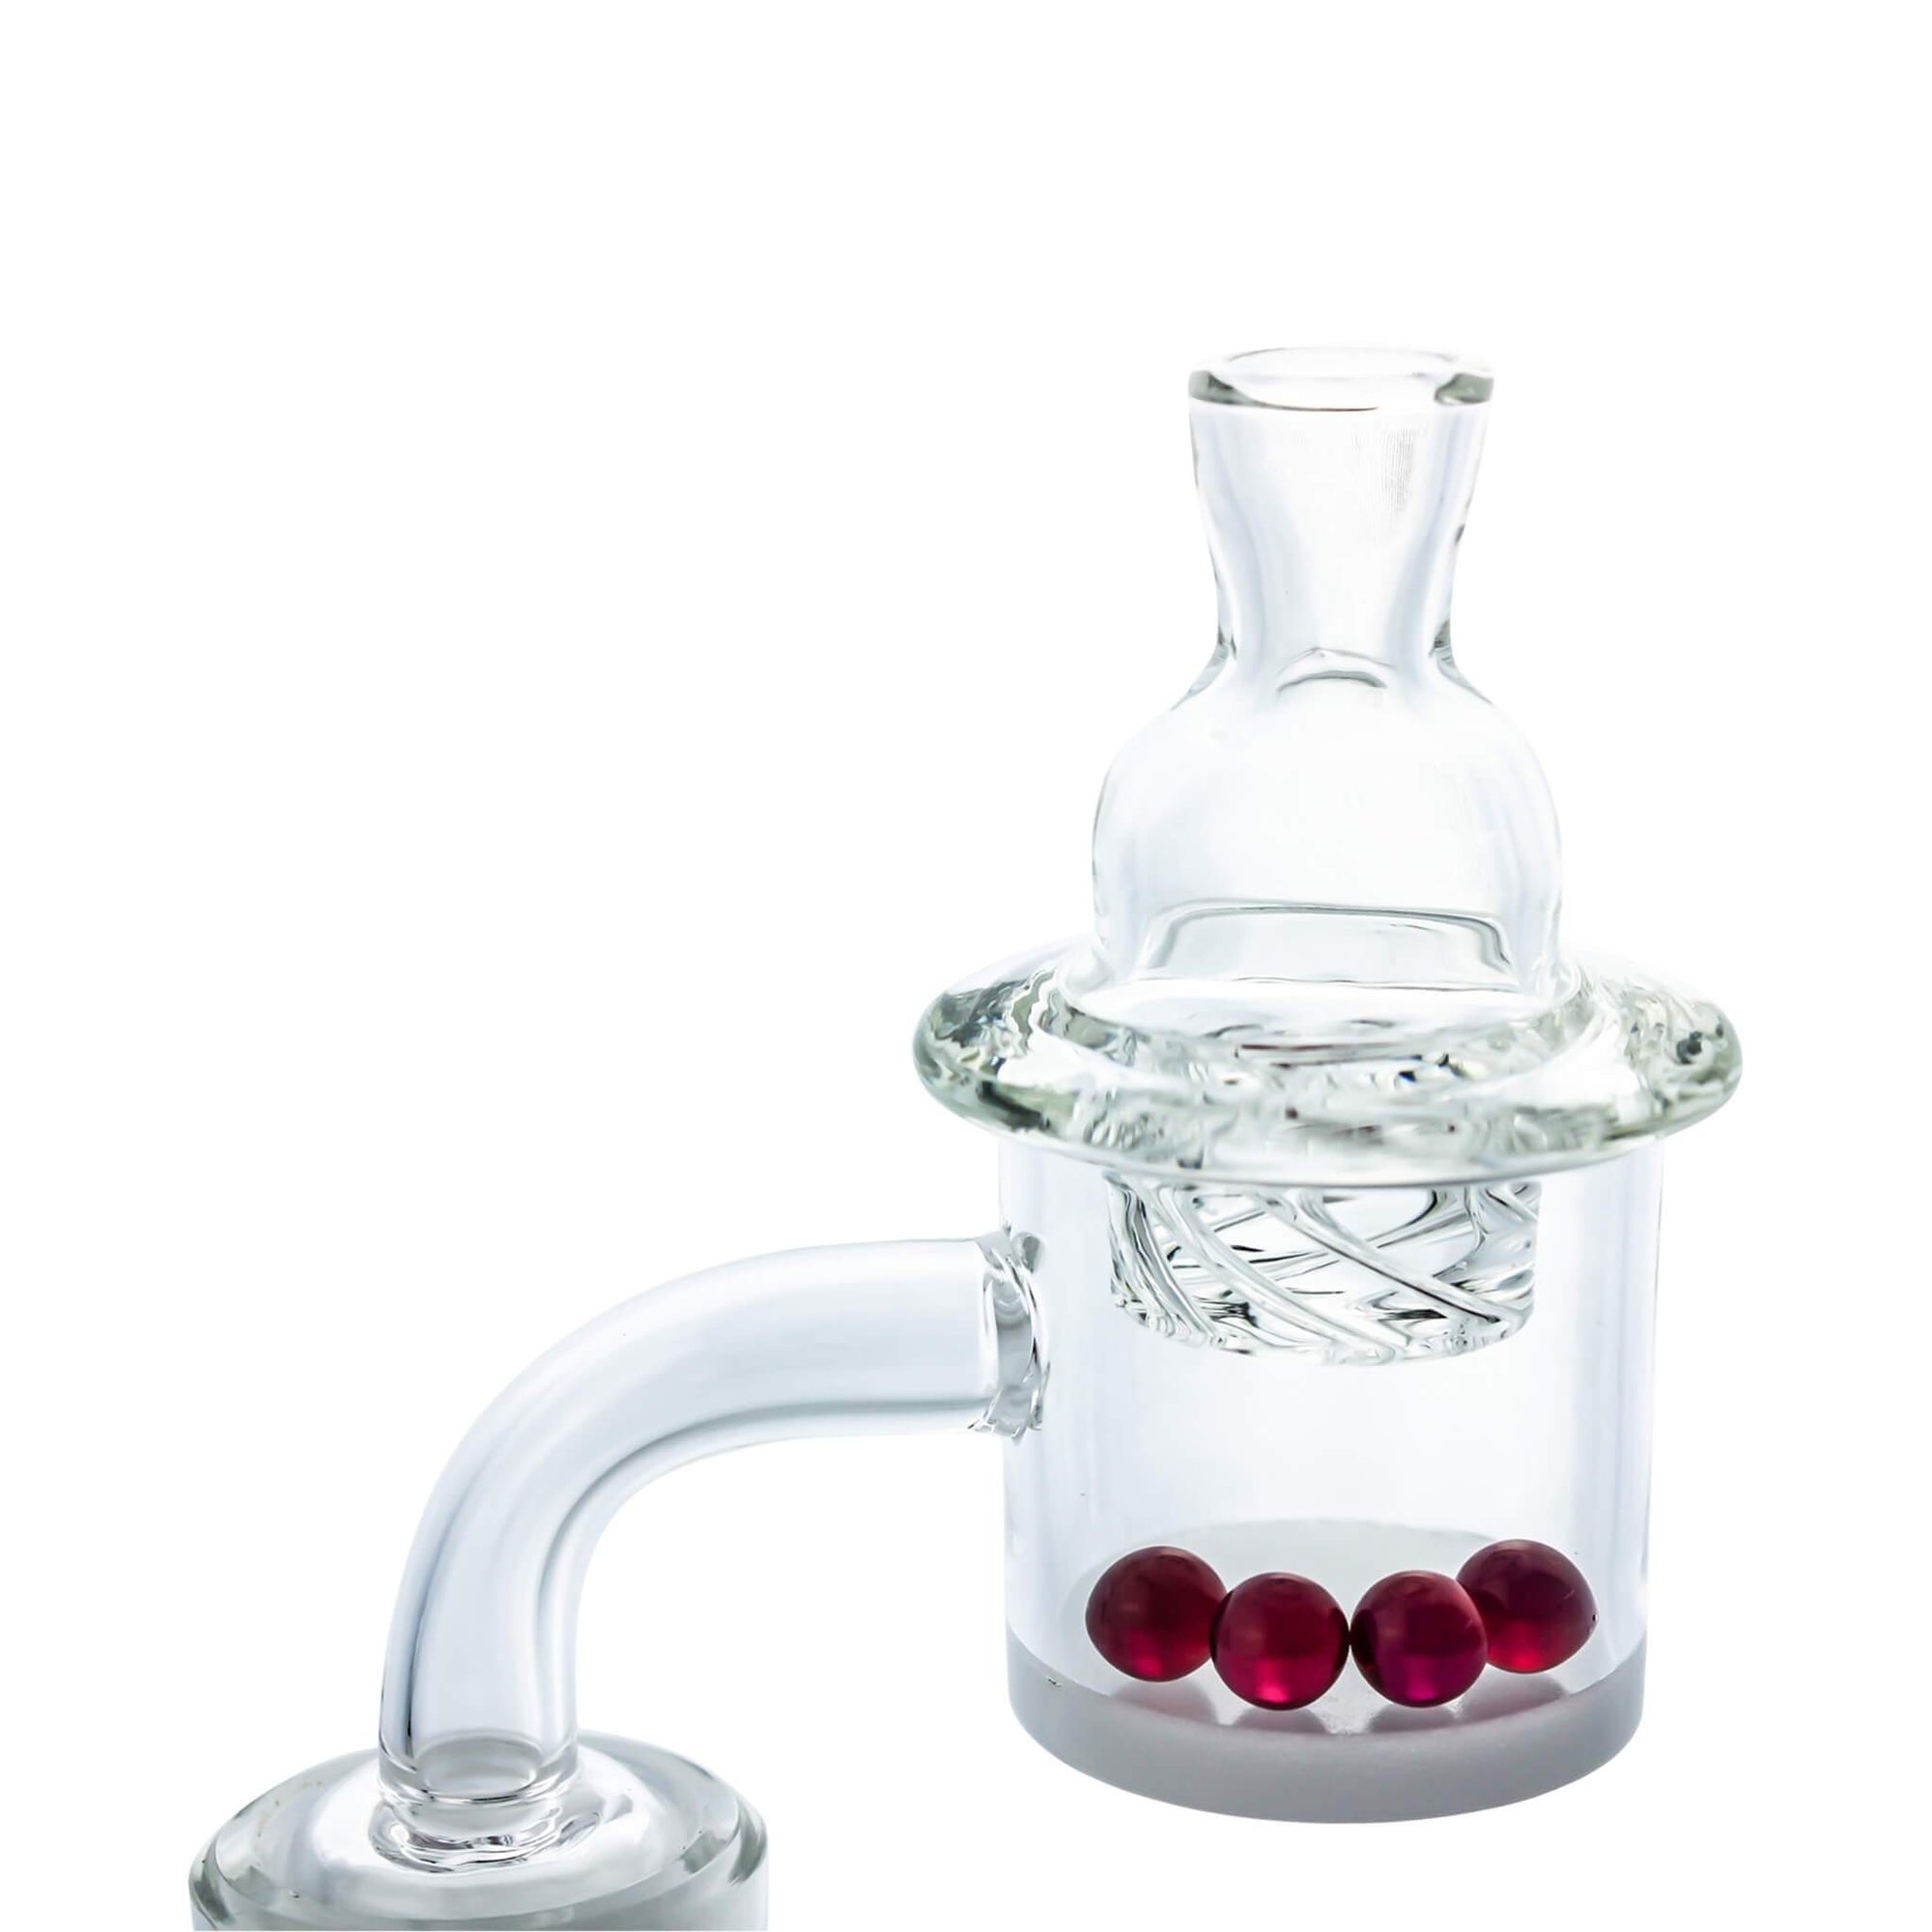 Terp Pearls, Mega Cyclone Spinner Carb Cap, 30mm Quartz Banger Combo | Combo Pack View-Amber | DW